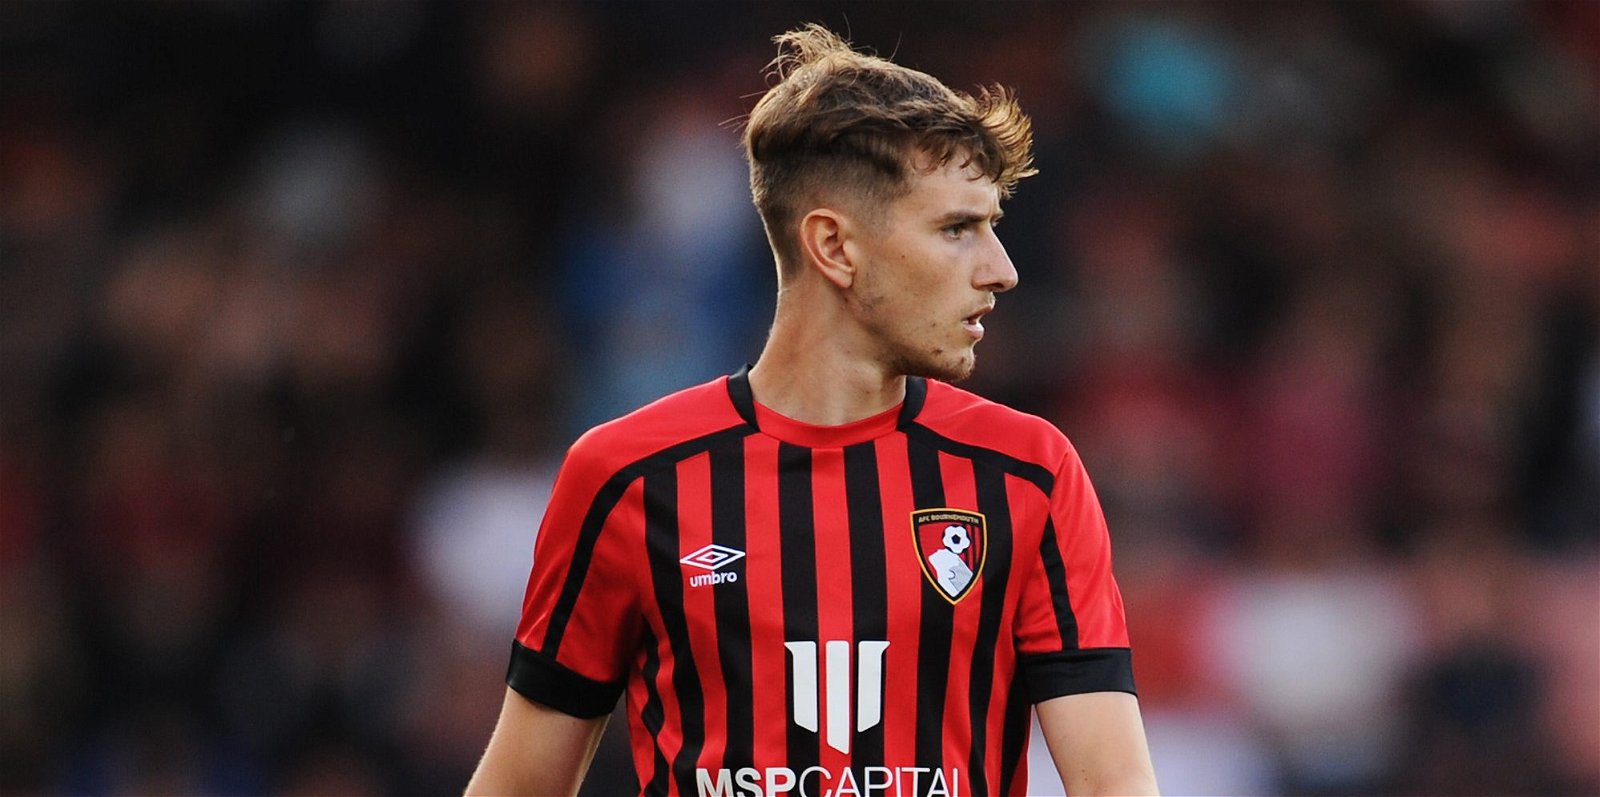 , &#8216;Pathetic&#8217;, &#8216;Absolutely unforgiveable&#8217; &#8211; Plenty of Bournemouth fans left fuming as 24-y/o sees red